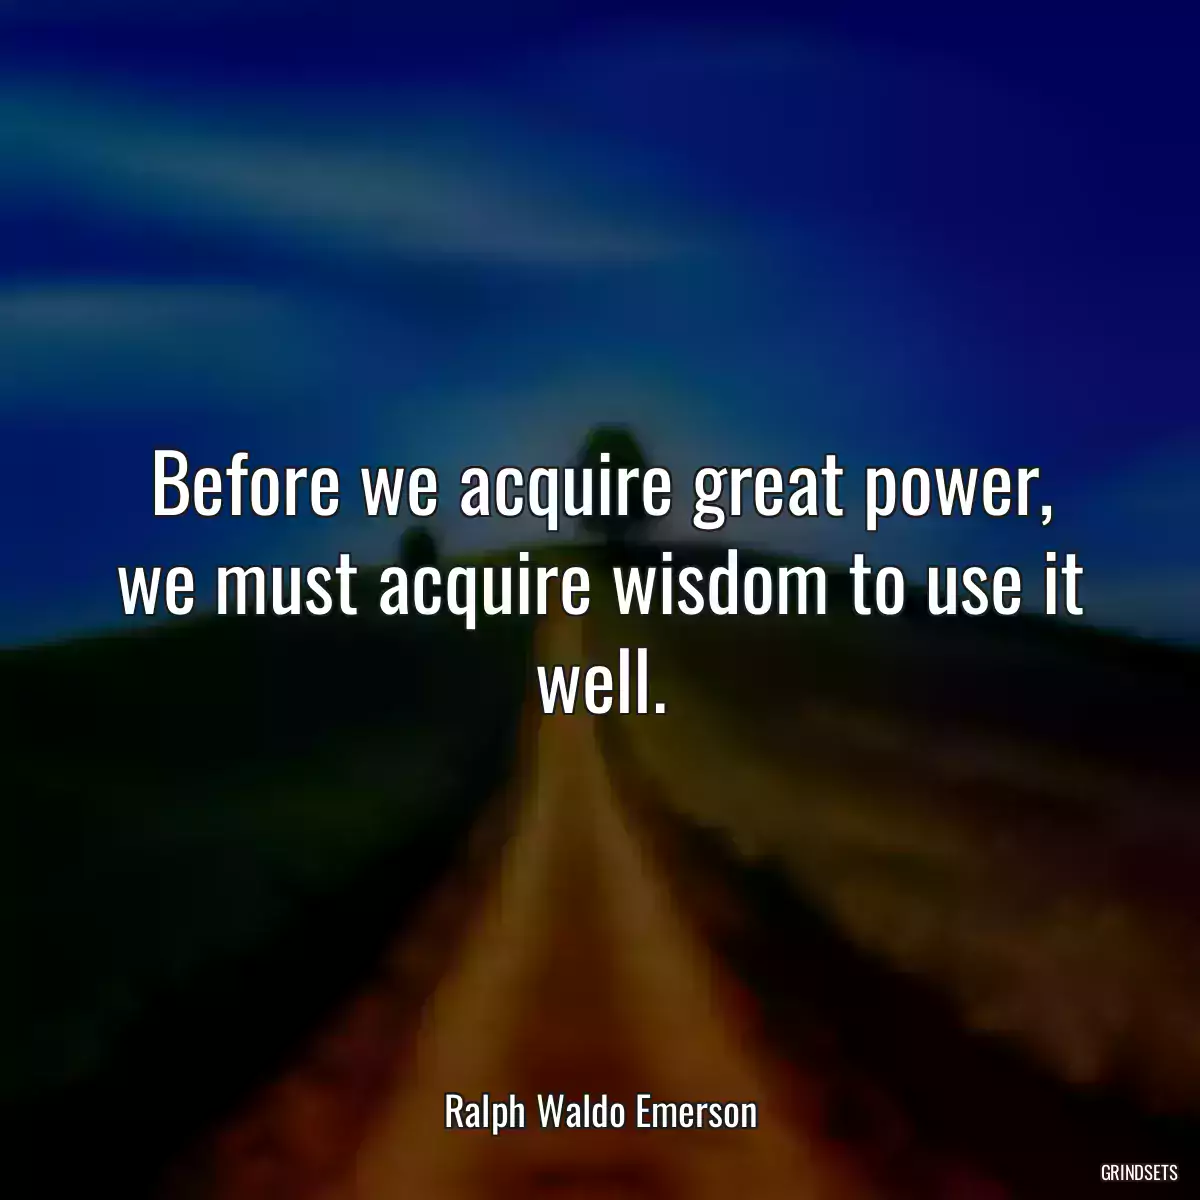 Before we acquire great power, we must acquire wisdom to use it well.